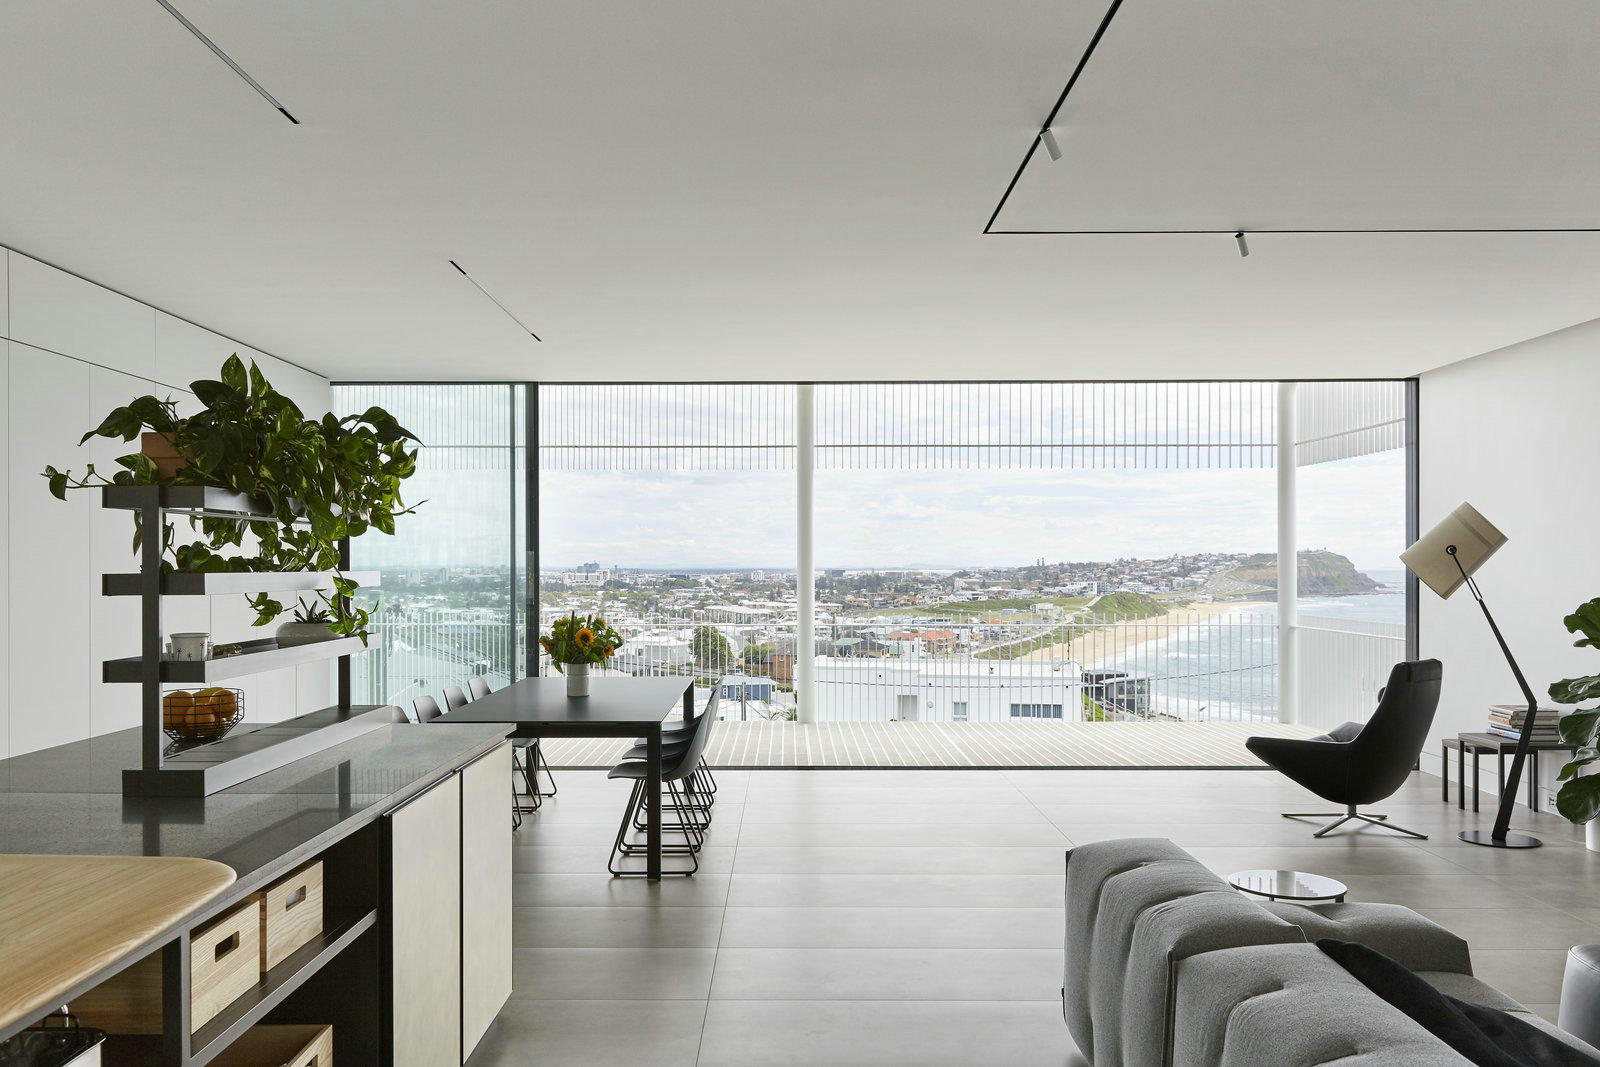 a-transparent-balcony-allows-unobstructed-views-of-the-sea-and-newcastles-skyline.jpg